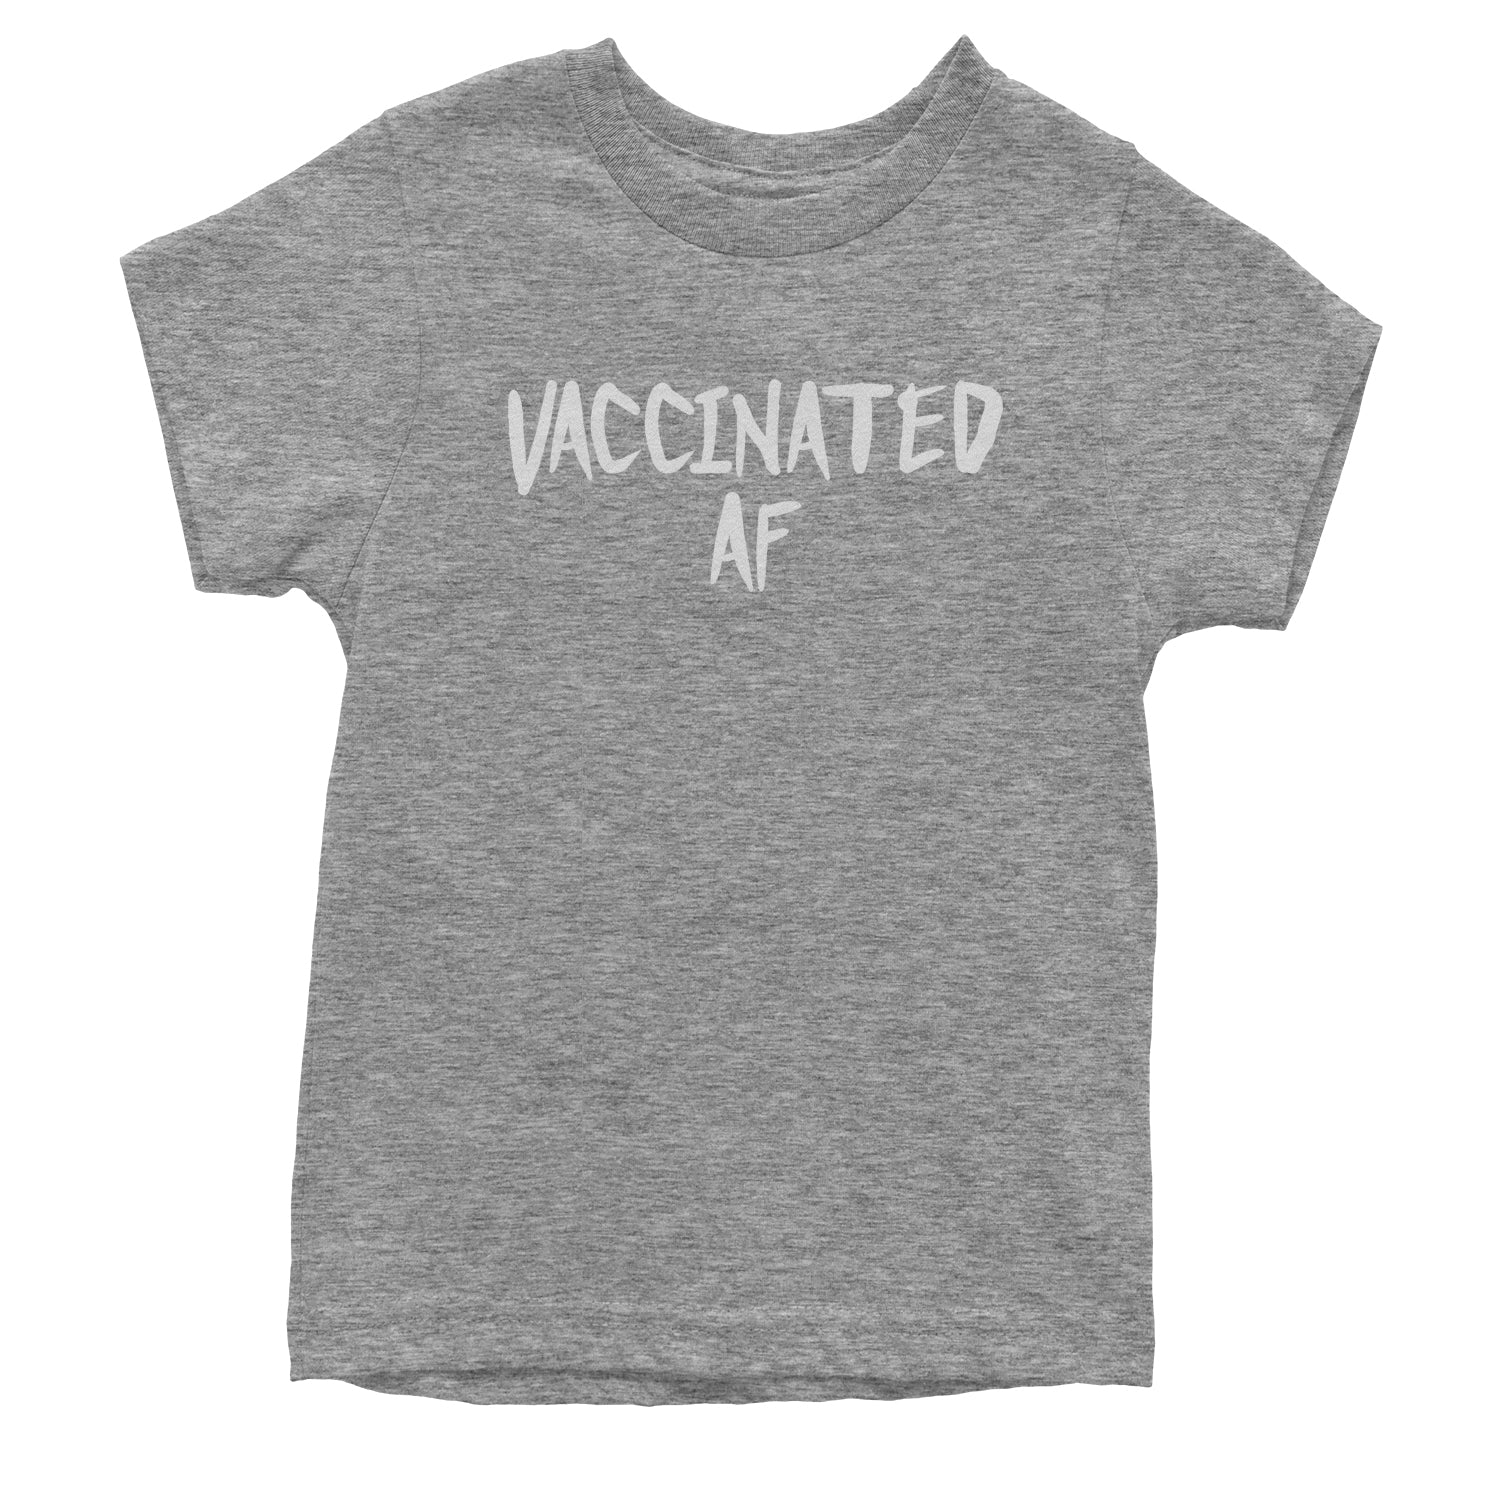 Vaccinated AF Pro Vaccine Funny Vaccination Health Youth T-shirt moderna, pfizer, vaccine, vax, vaxx by Expression Tees